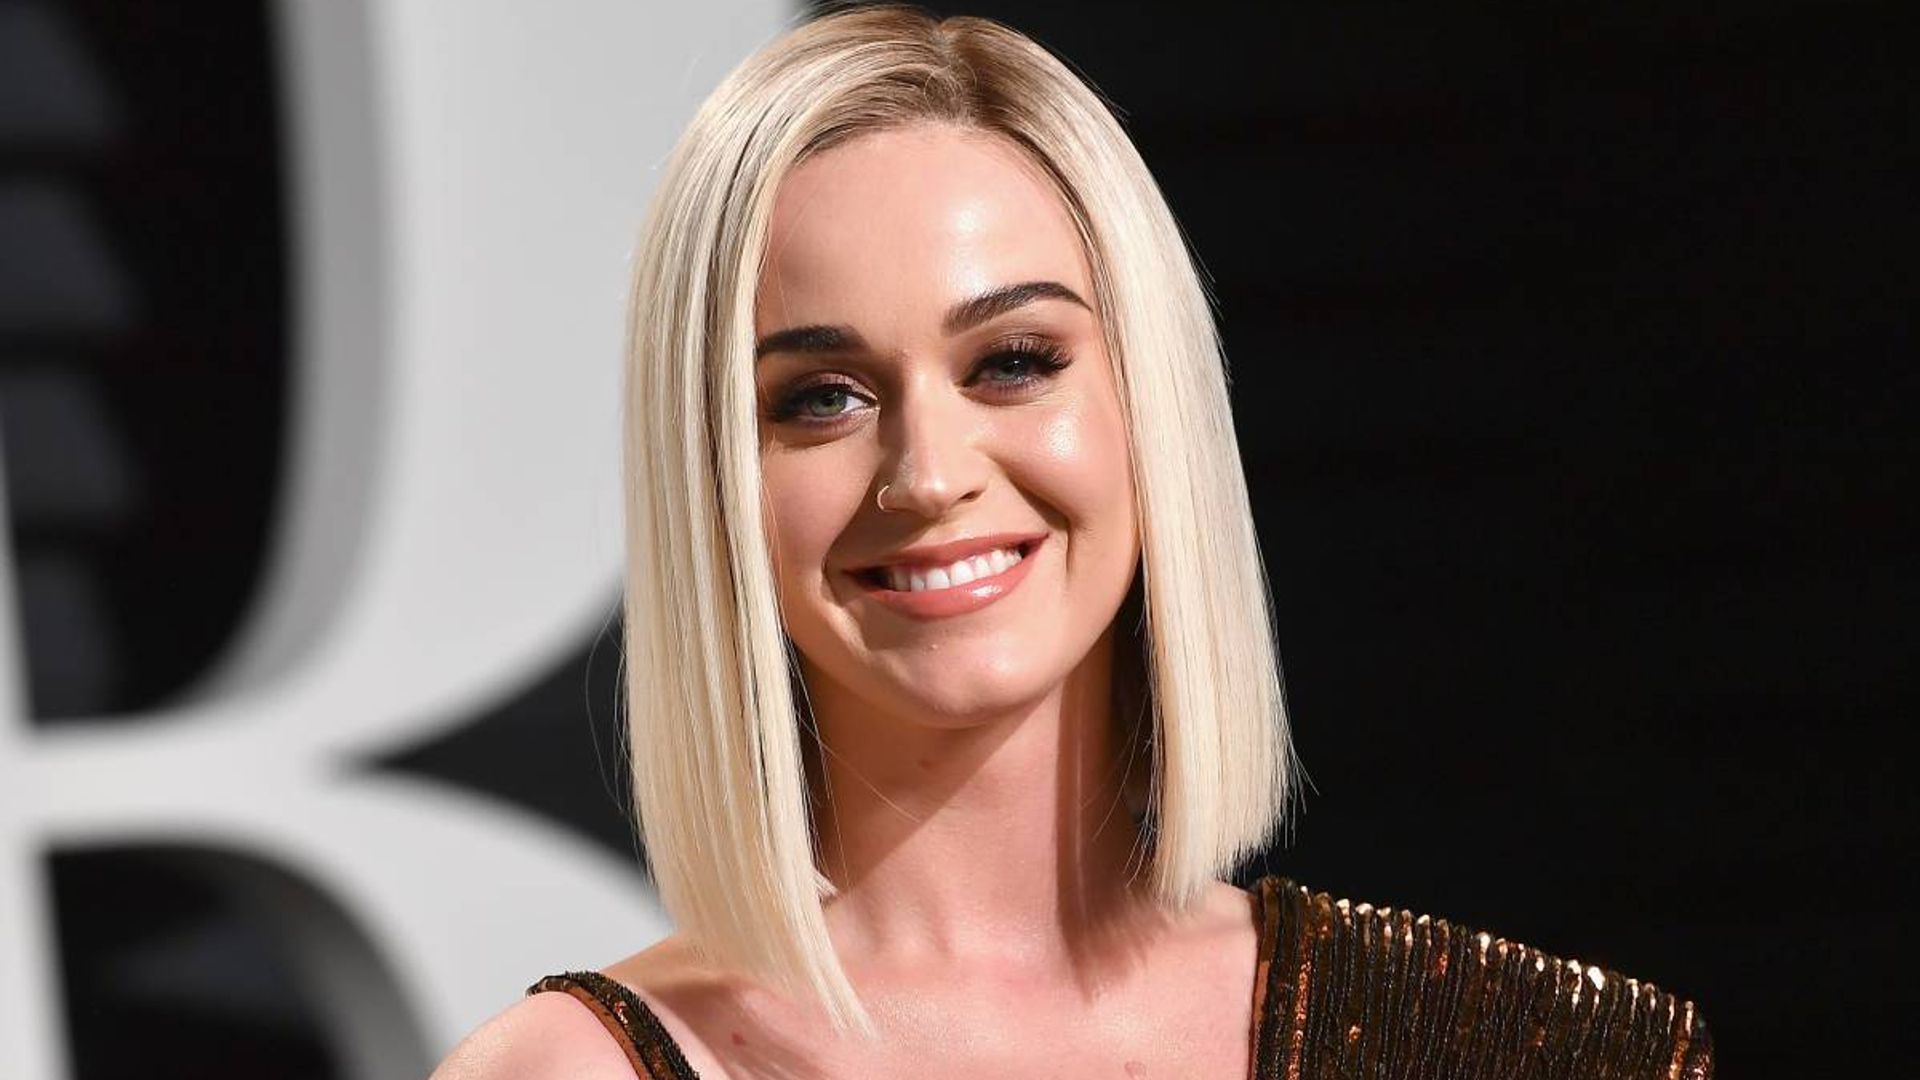 Katy Perry's baby joy with daughter Daisy – and everything she's said about expanding her family